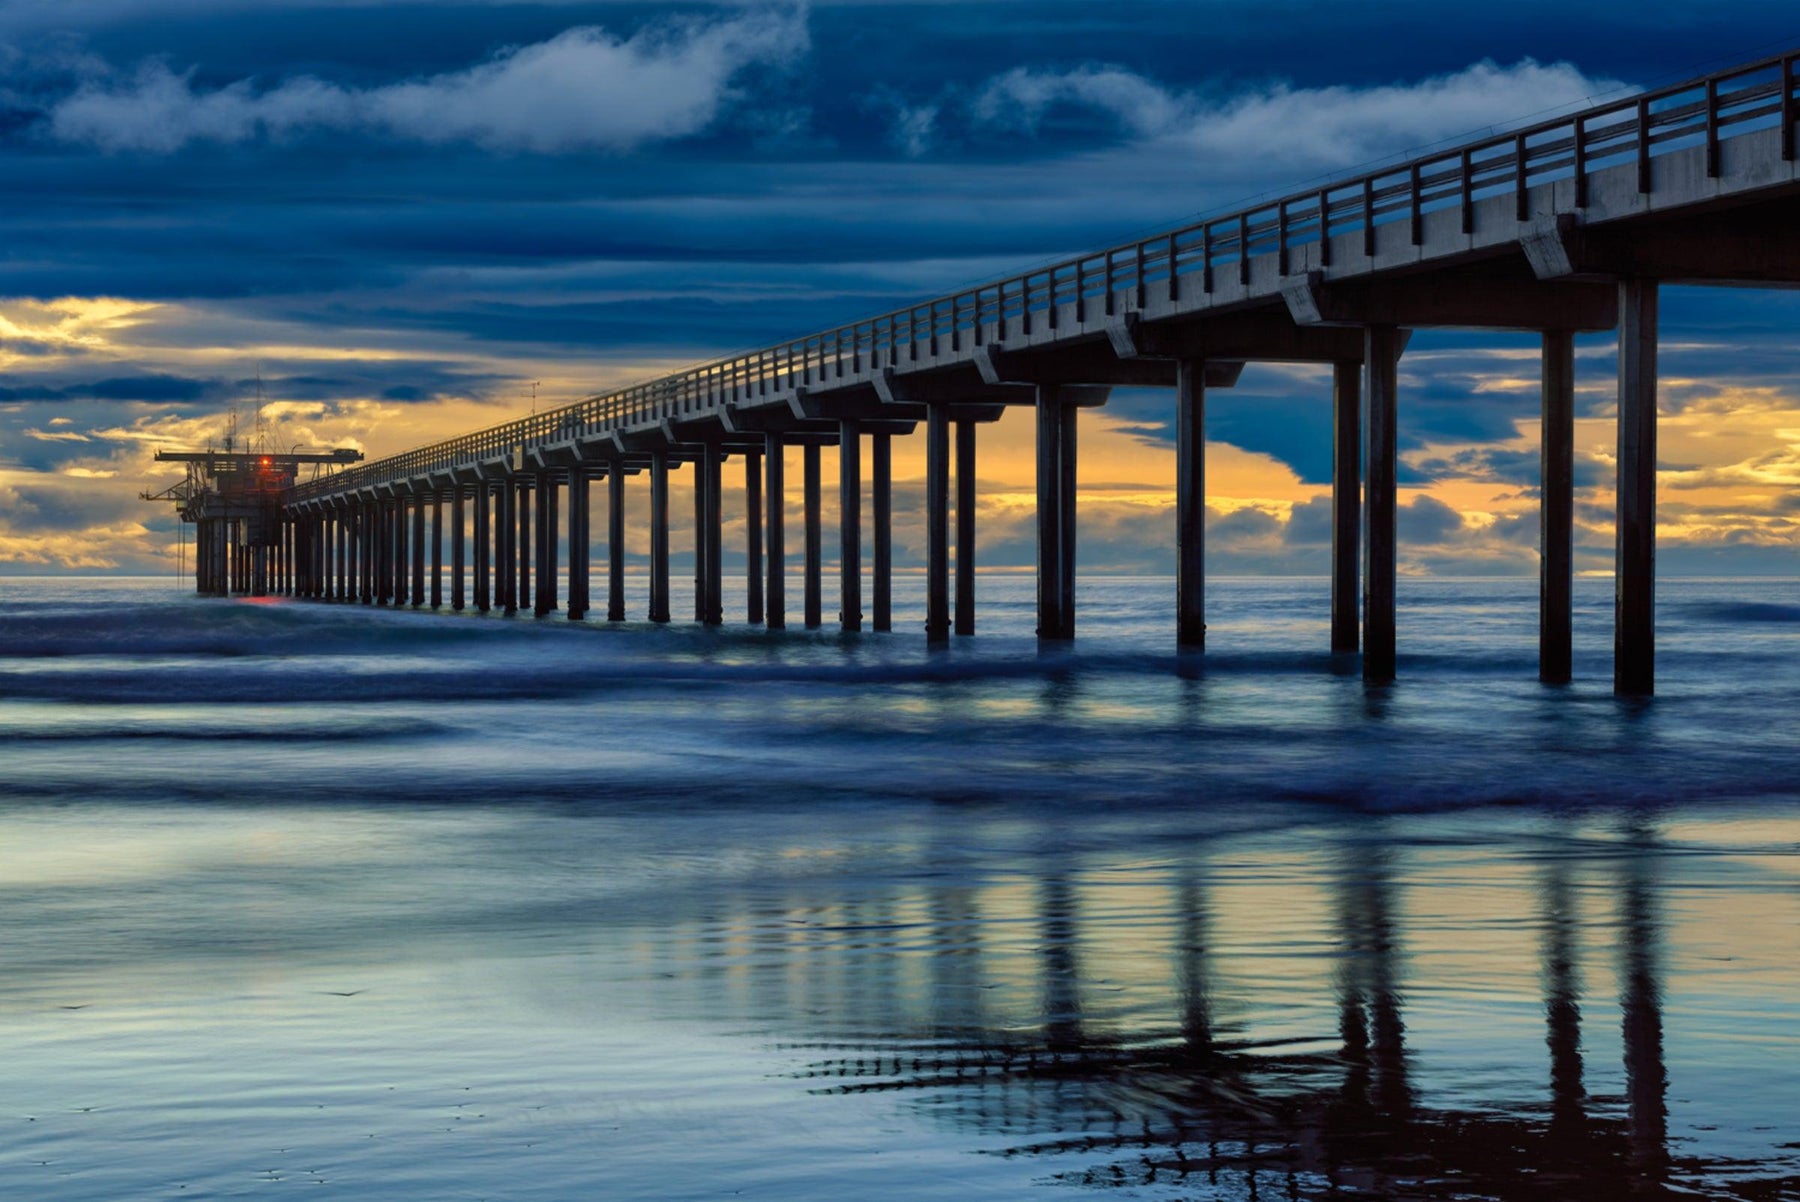 Scipps Pier in California leading off into the ocean under a blue and stormy sky